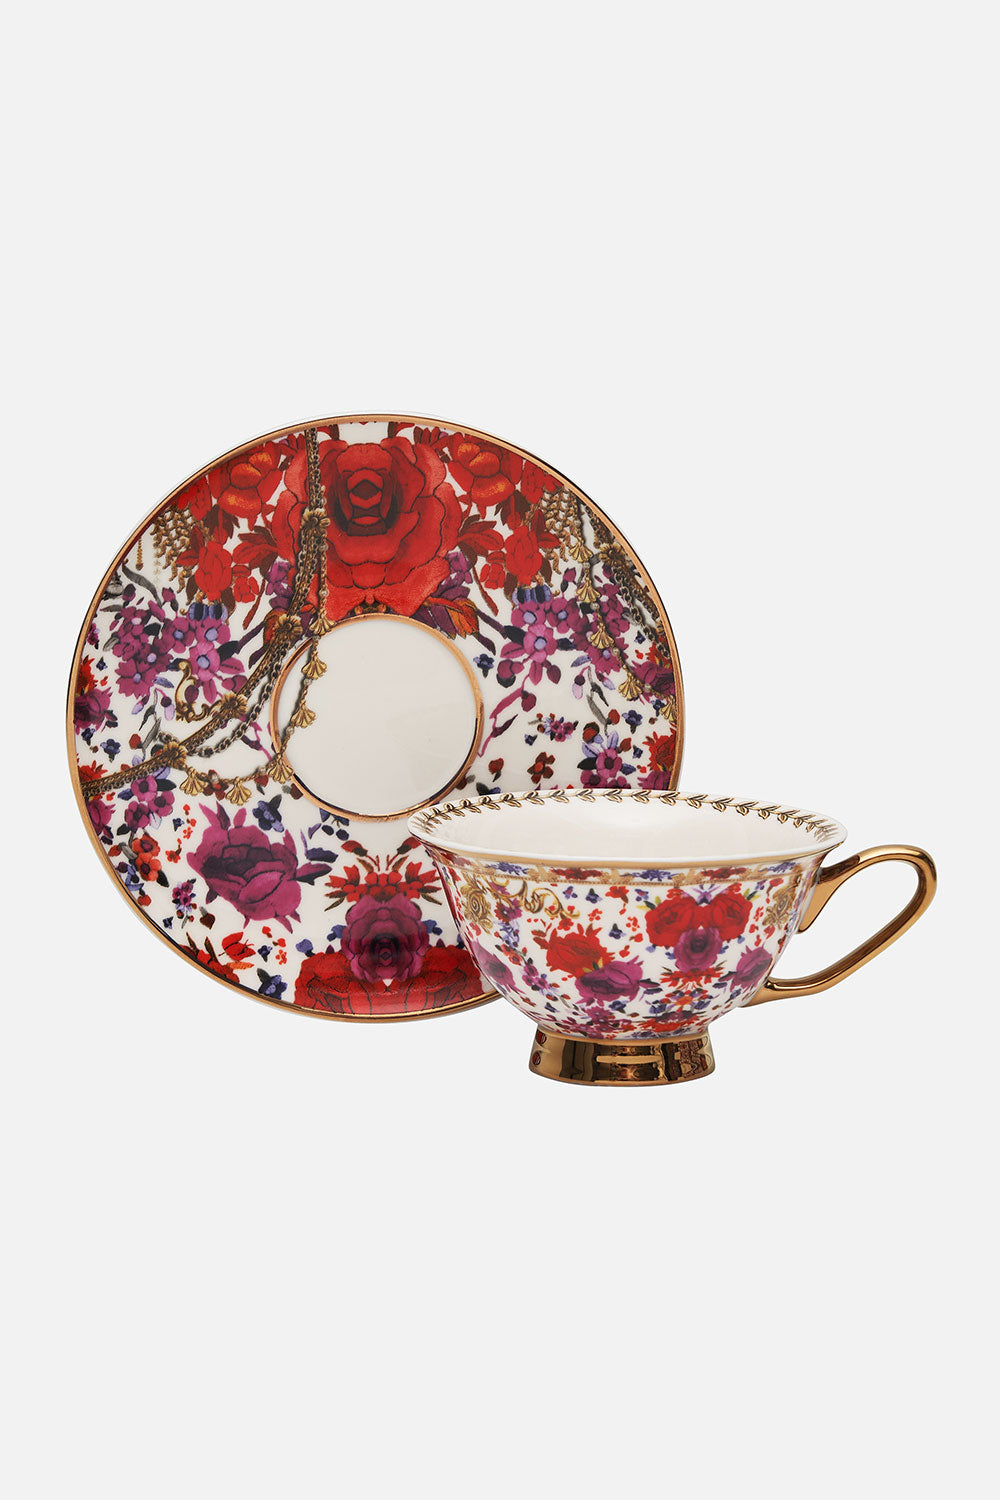 TEA CUP AND SAUCER SET REIGN OF ROSES